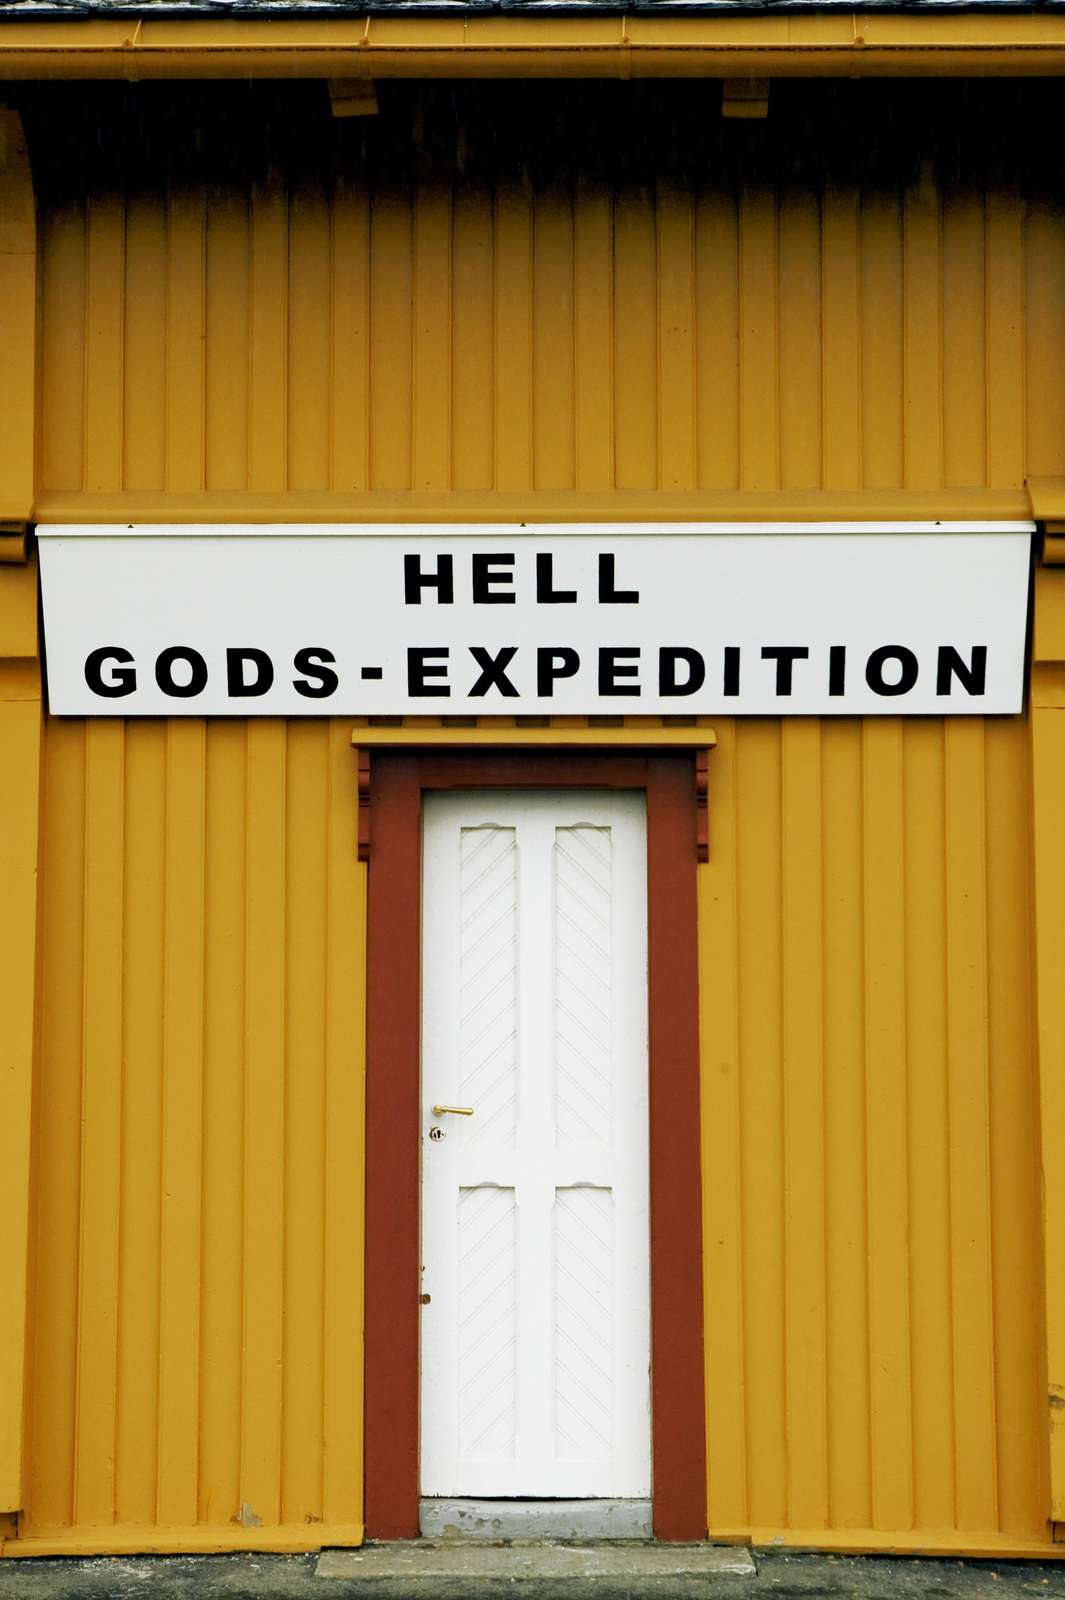 "God's expedition" 